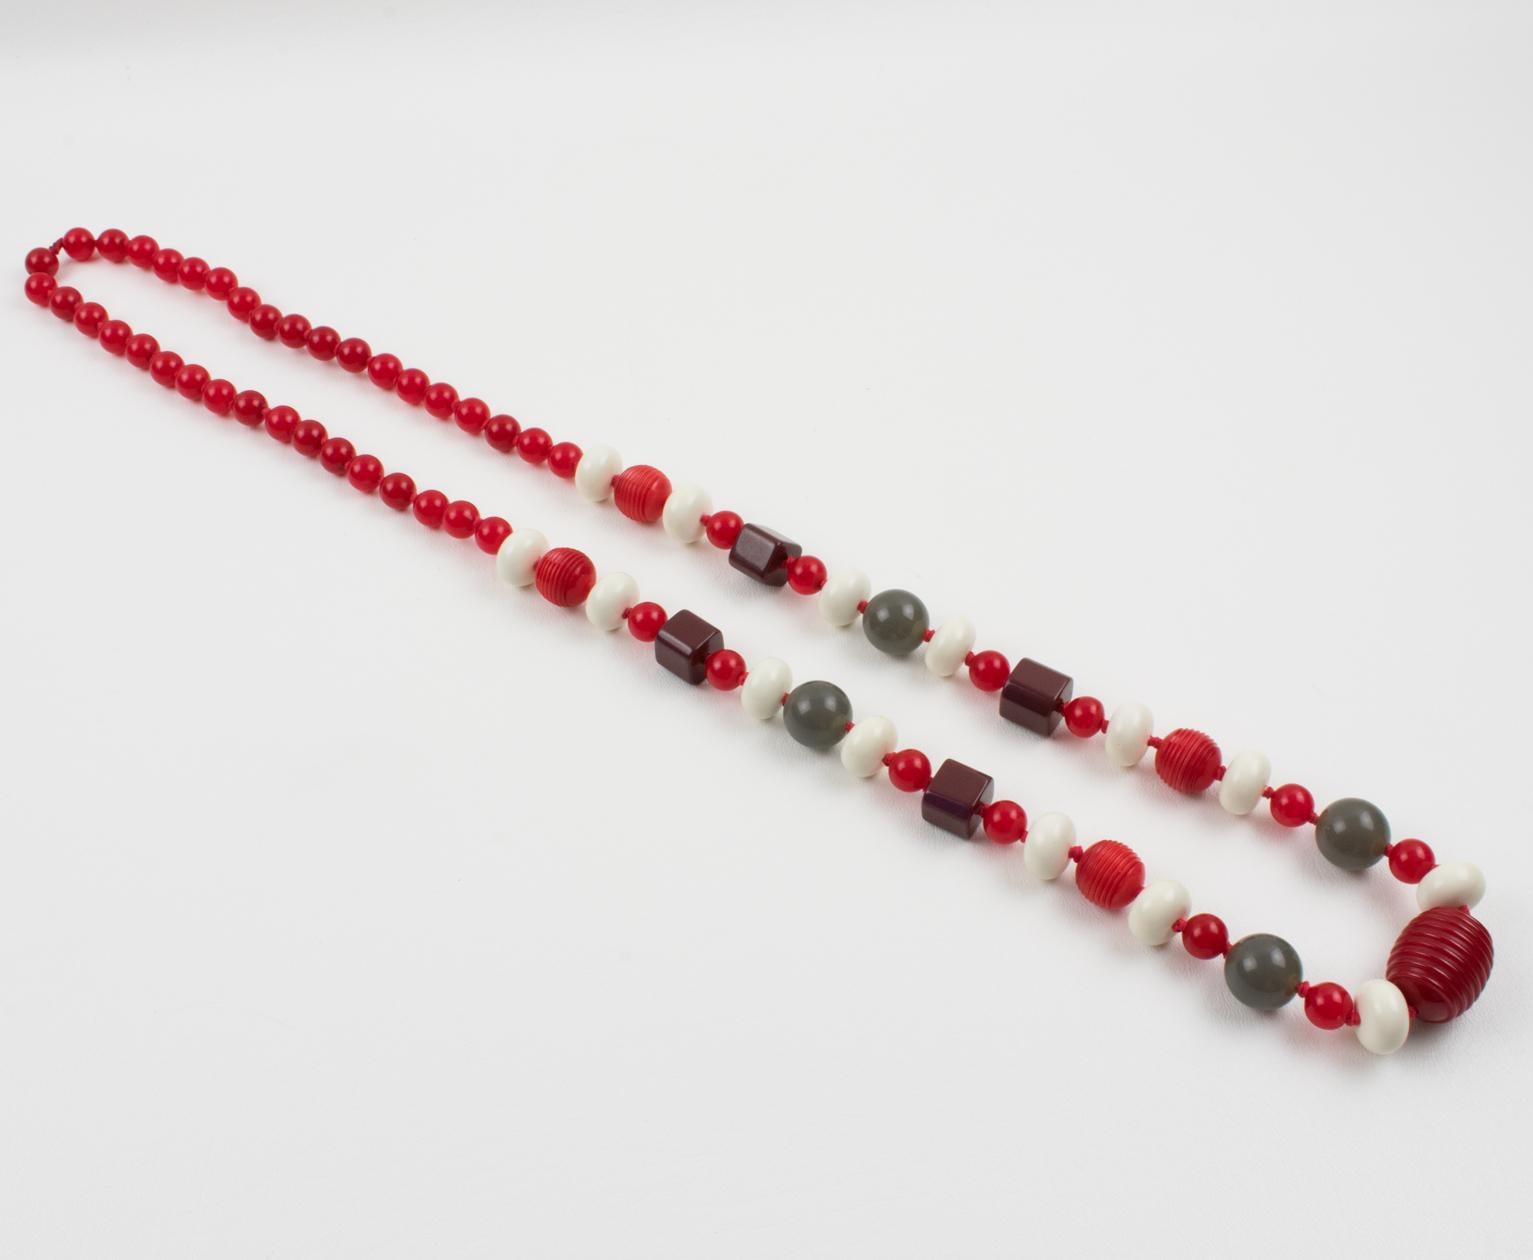 Bakelite and Lucite Long Necklace Gray, White, and Red Colors For Sale 2